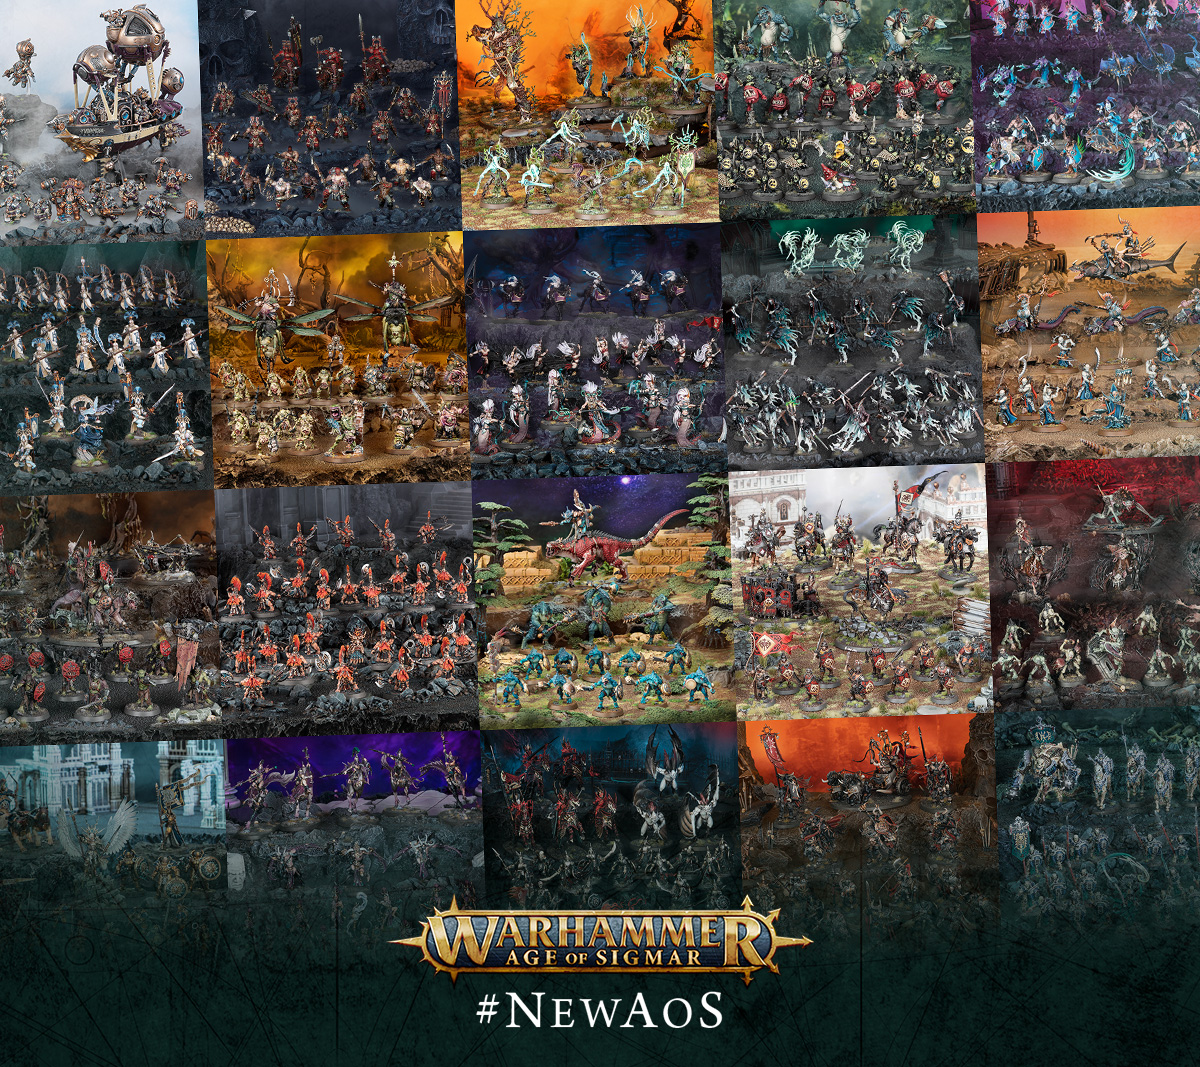 There's an exciting game mode for #NewAoS – learn about Spearhead, the fast-paced way to battle in the Mortal Realms. ow.ly/PObH50Rtxwn #WarhammerCommunity #NewAoS